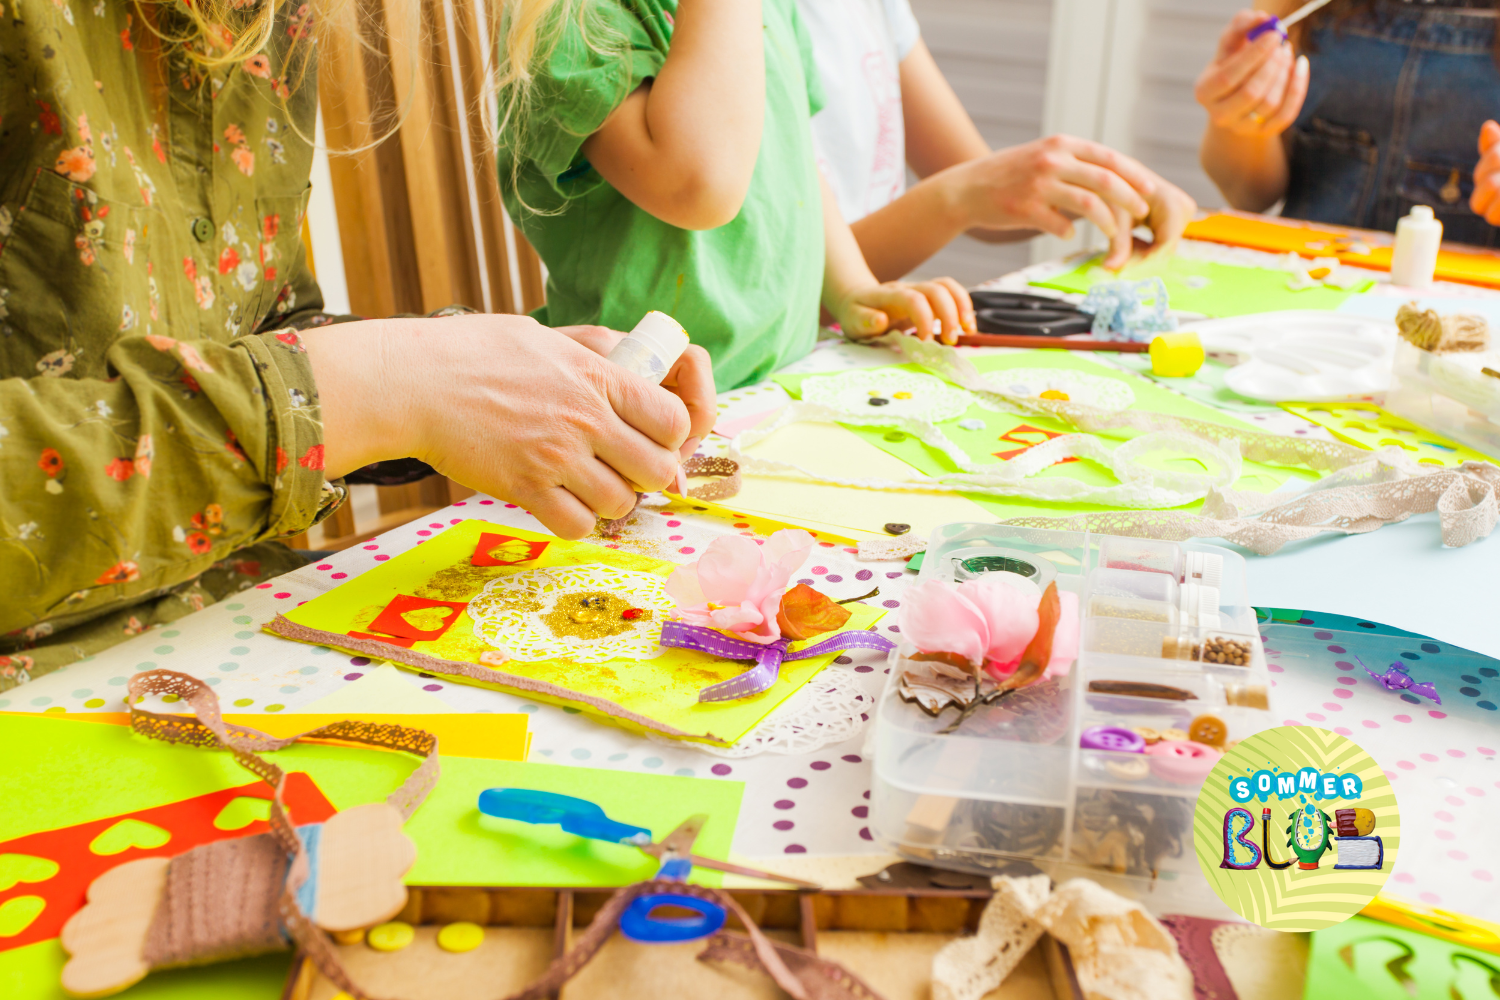 Children do crafts at a table